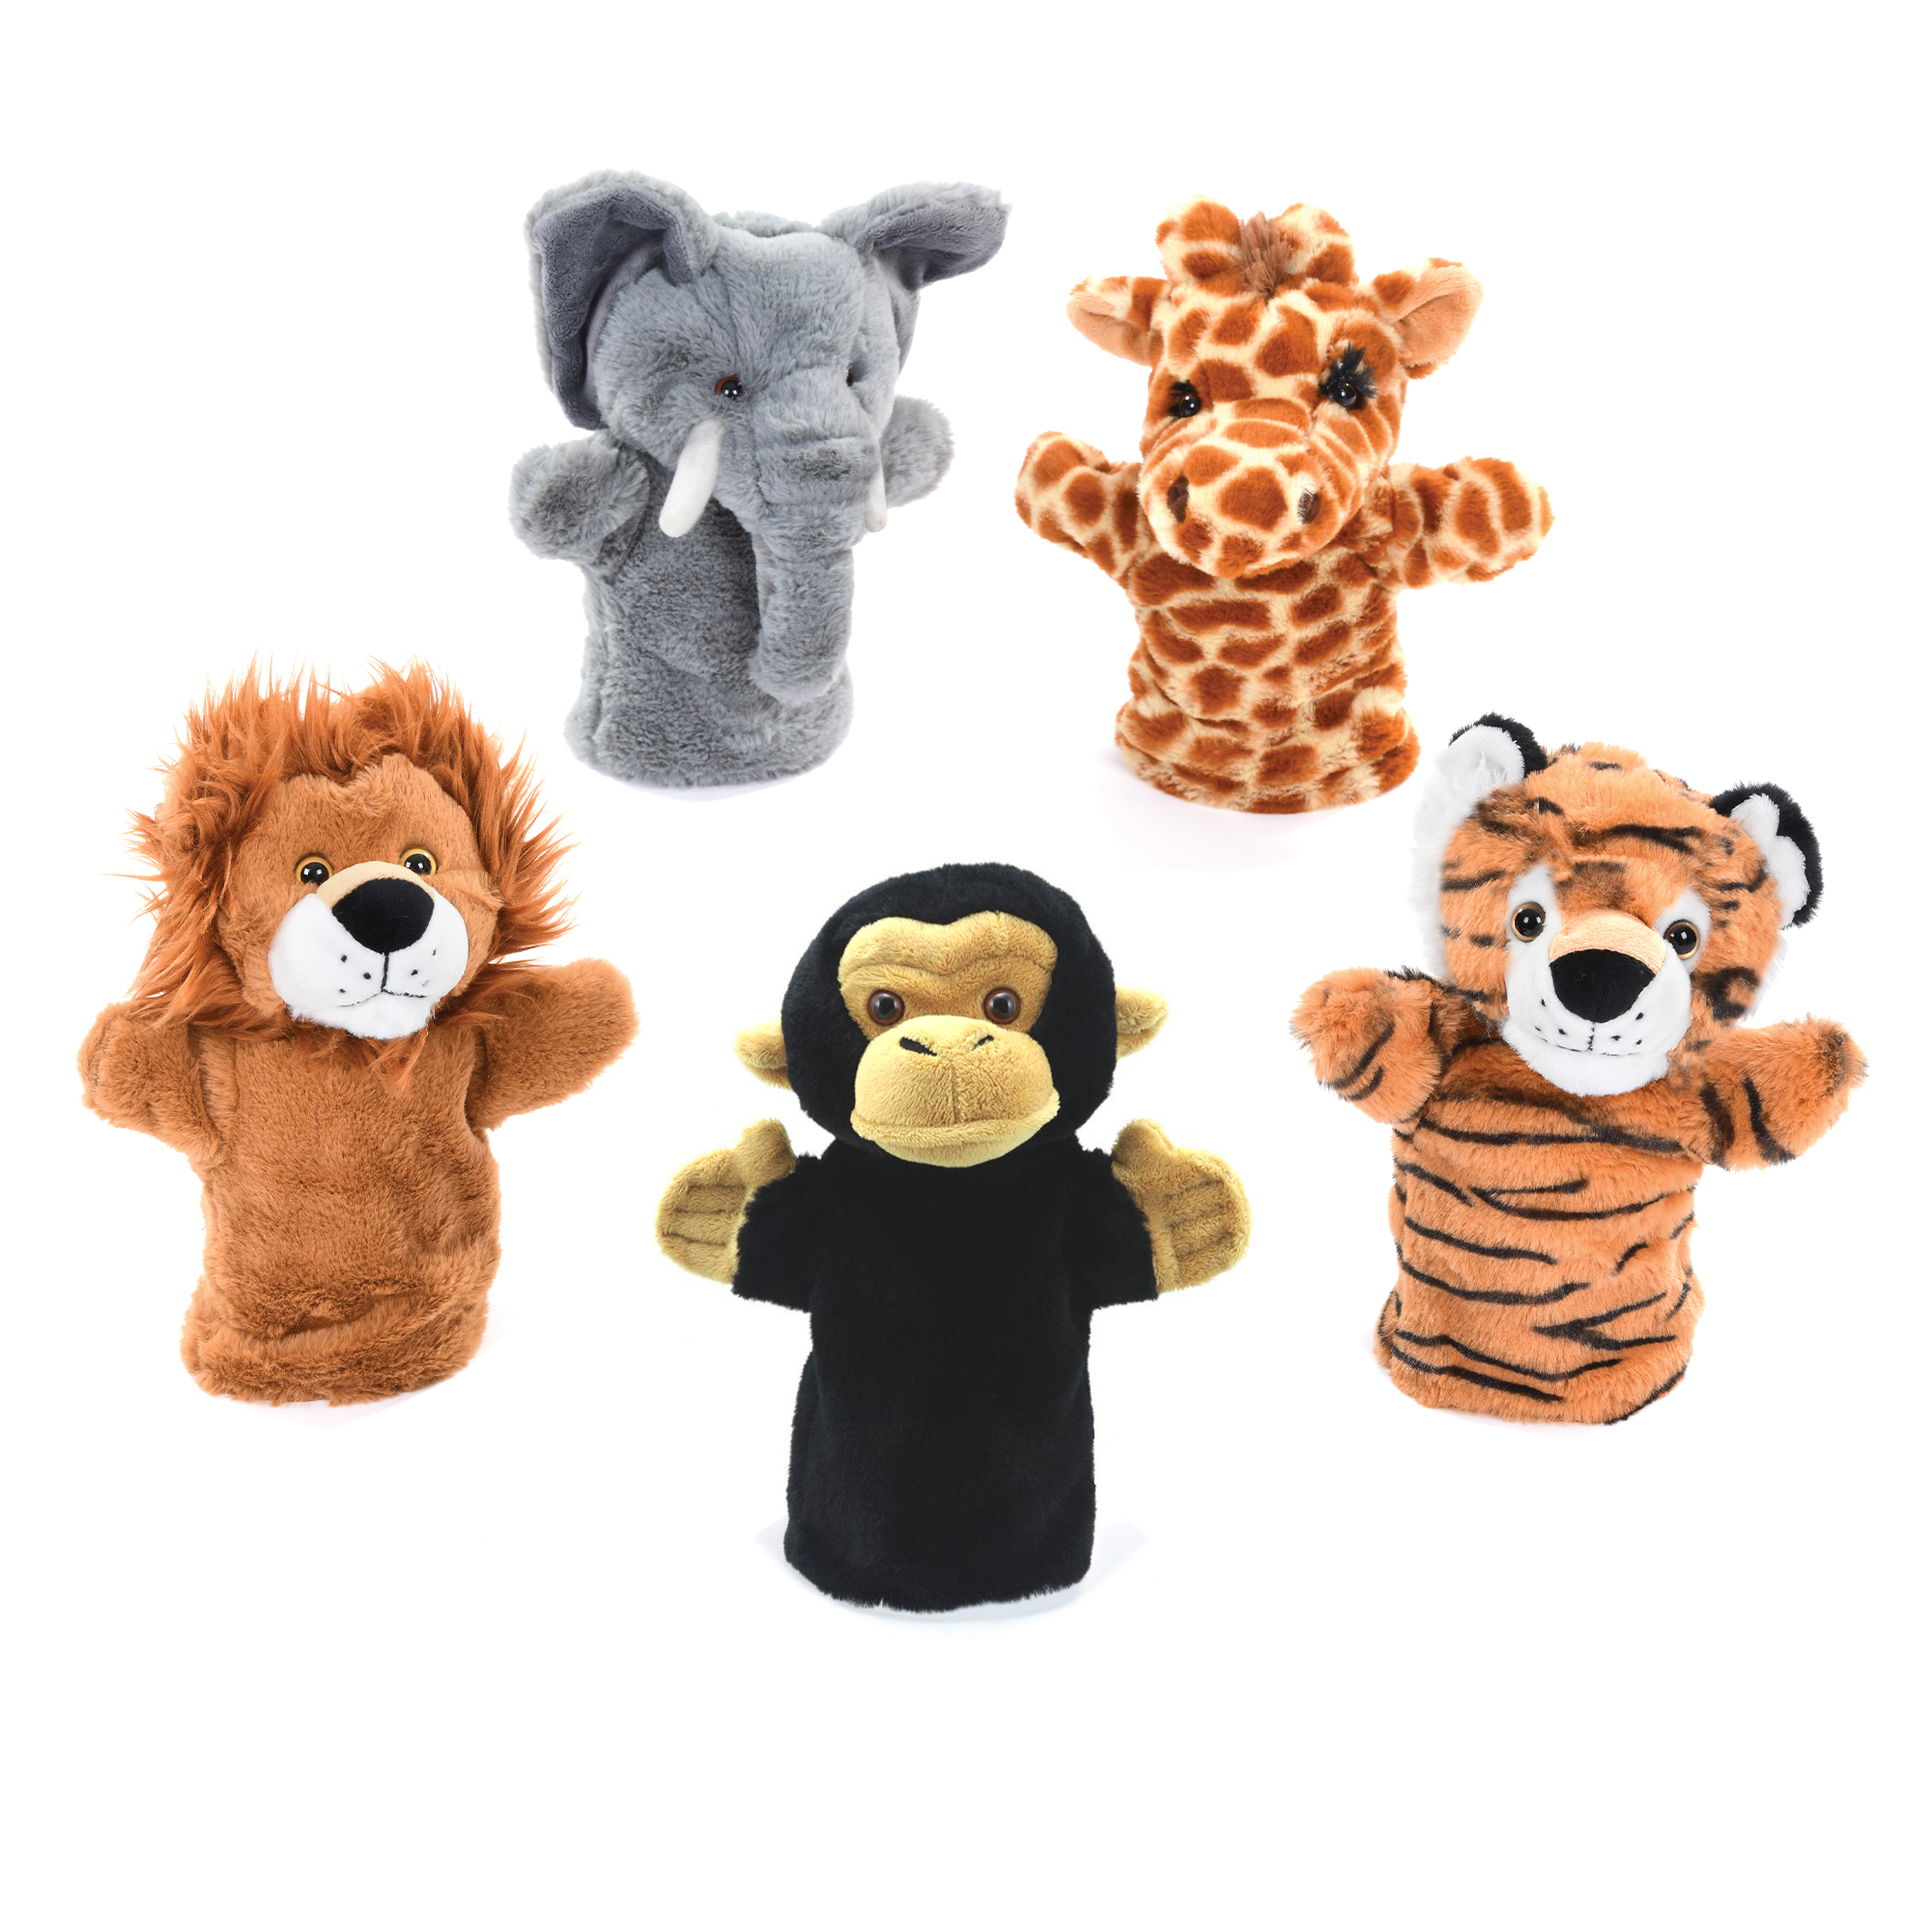 Wild Animal Hand Puppets - Children's Story Resources - Early Excellence